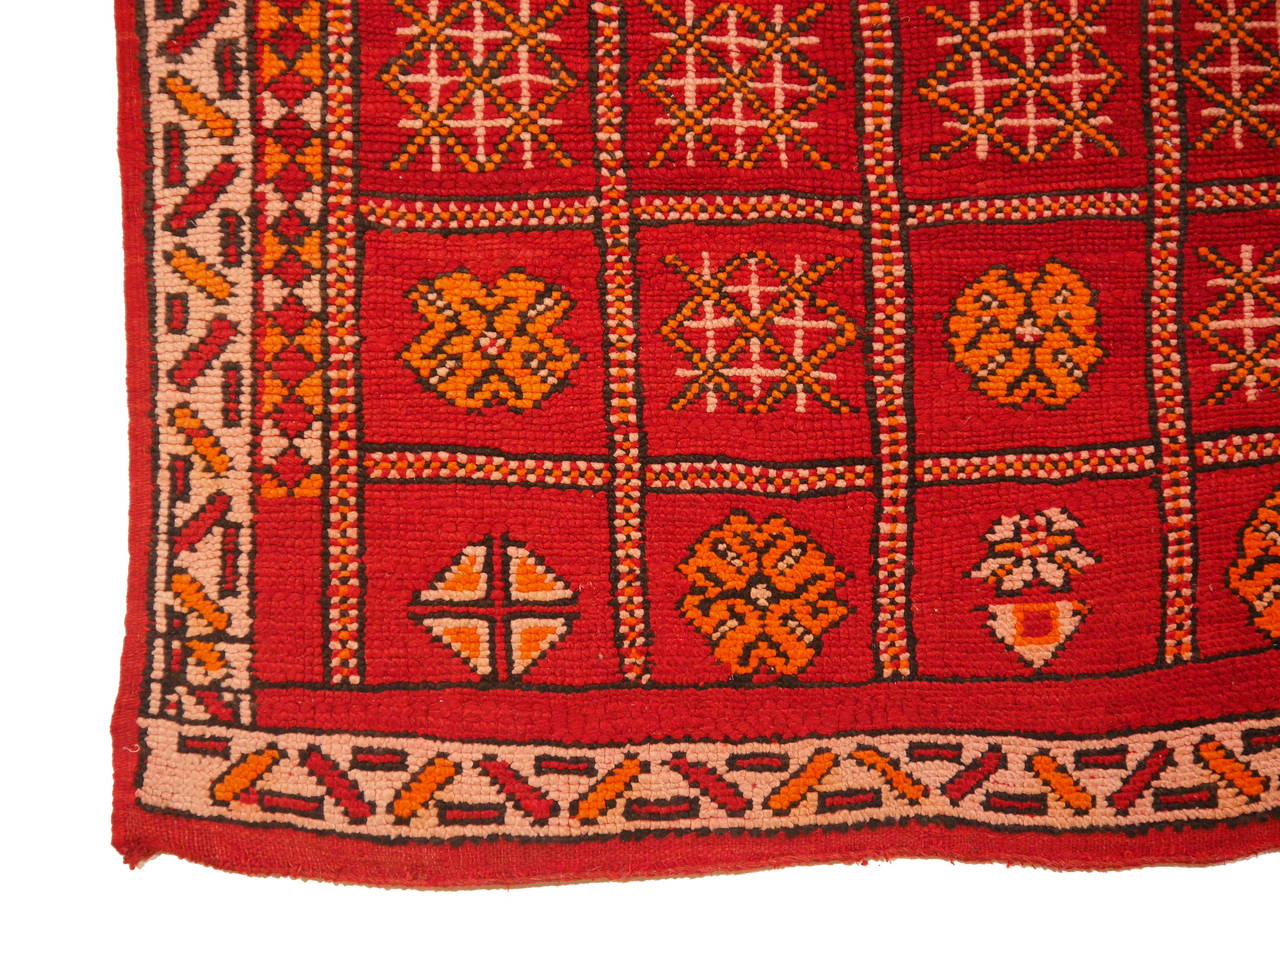 Nice vintage Berber rug, made by women of the Boujad tribe in western Morocco. Very good condition and beautiful colors.